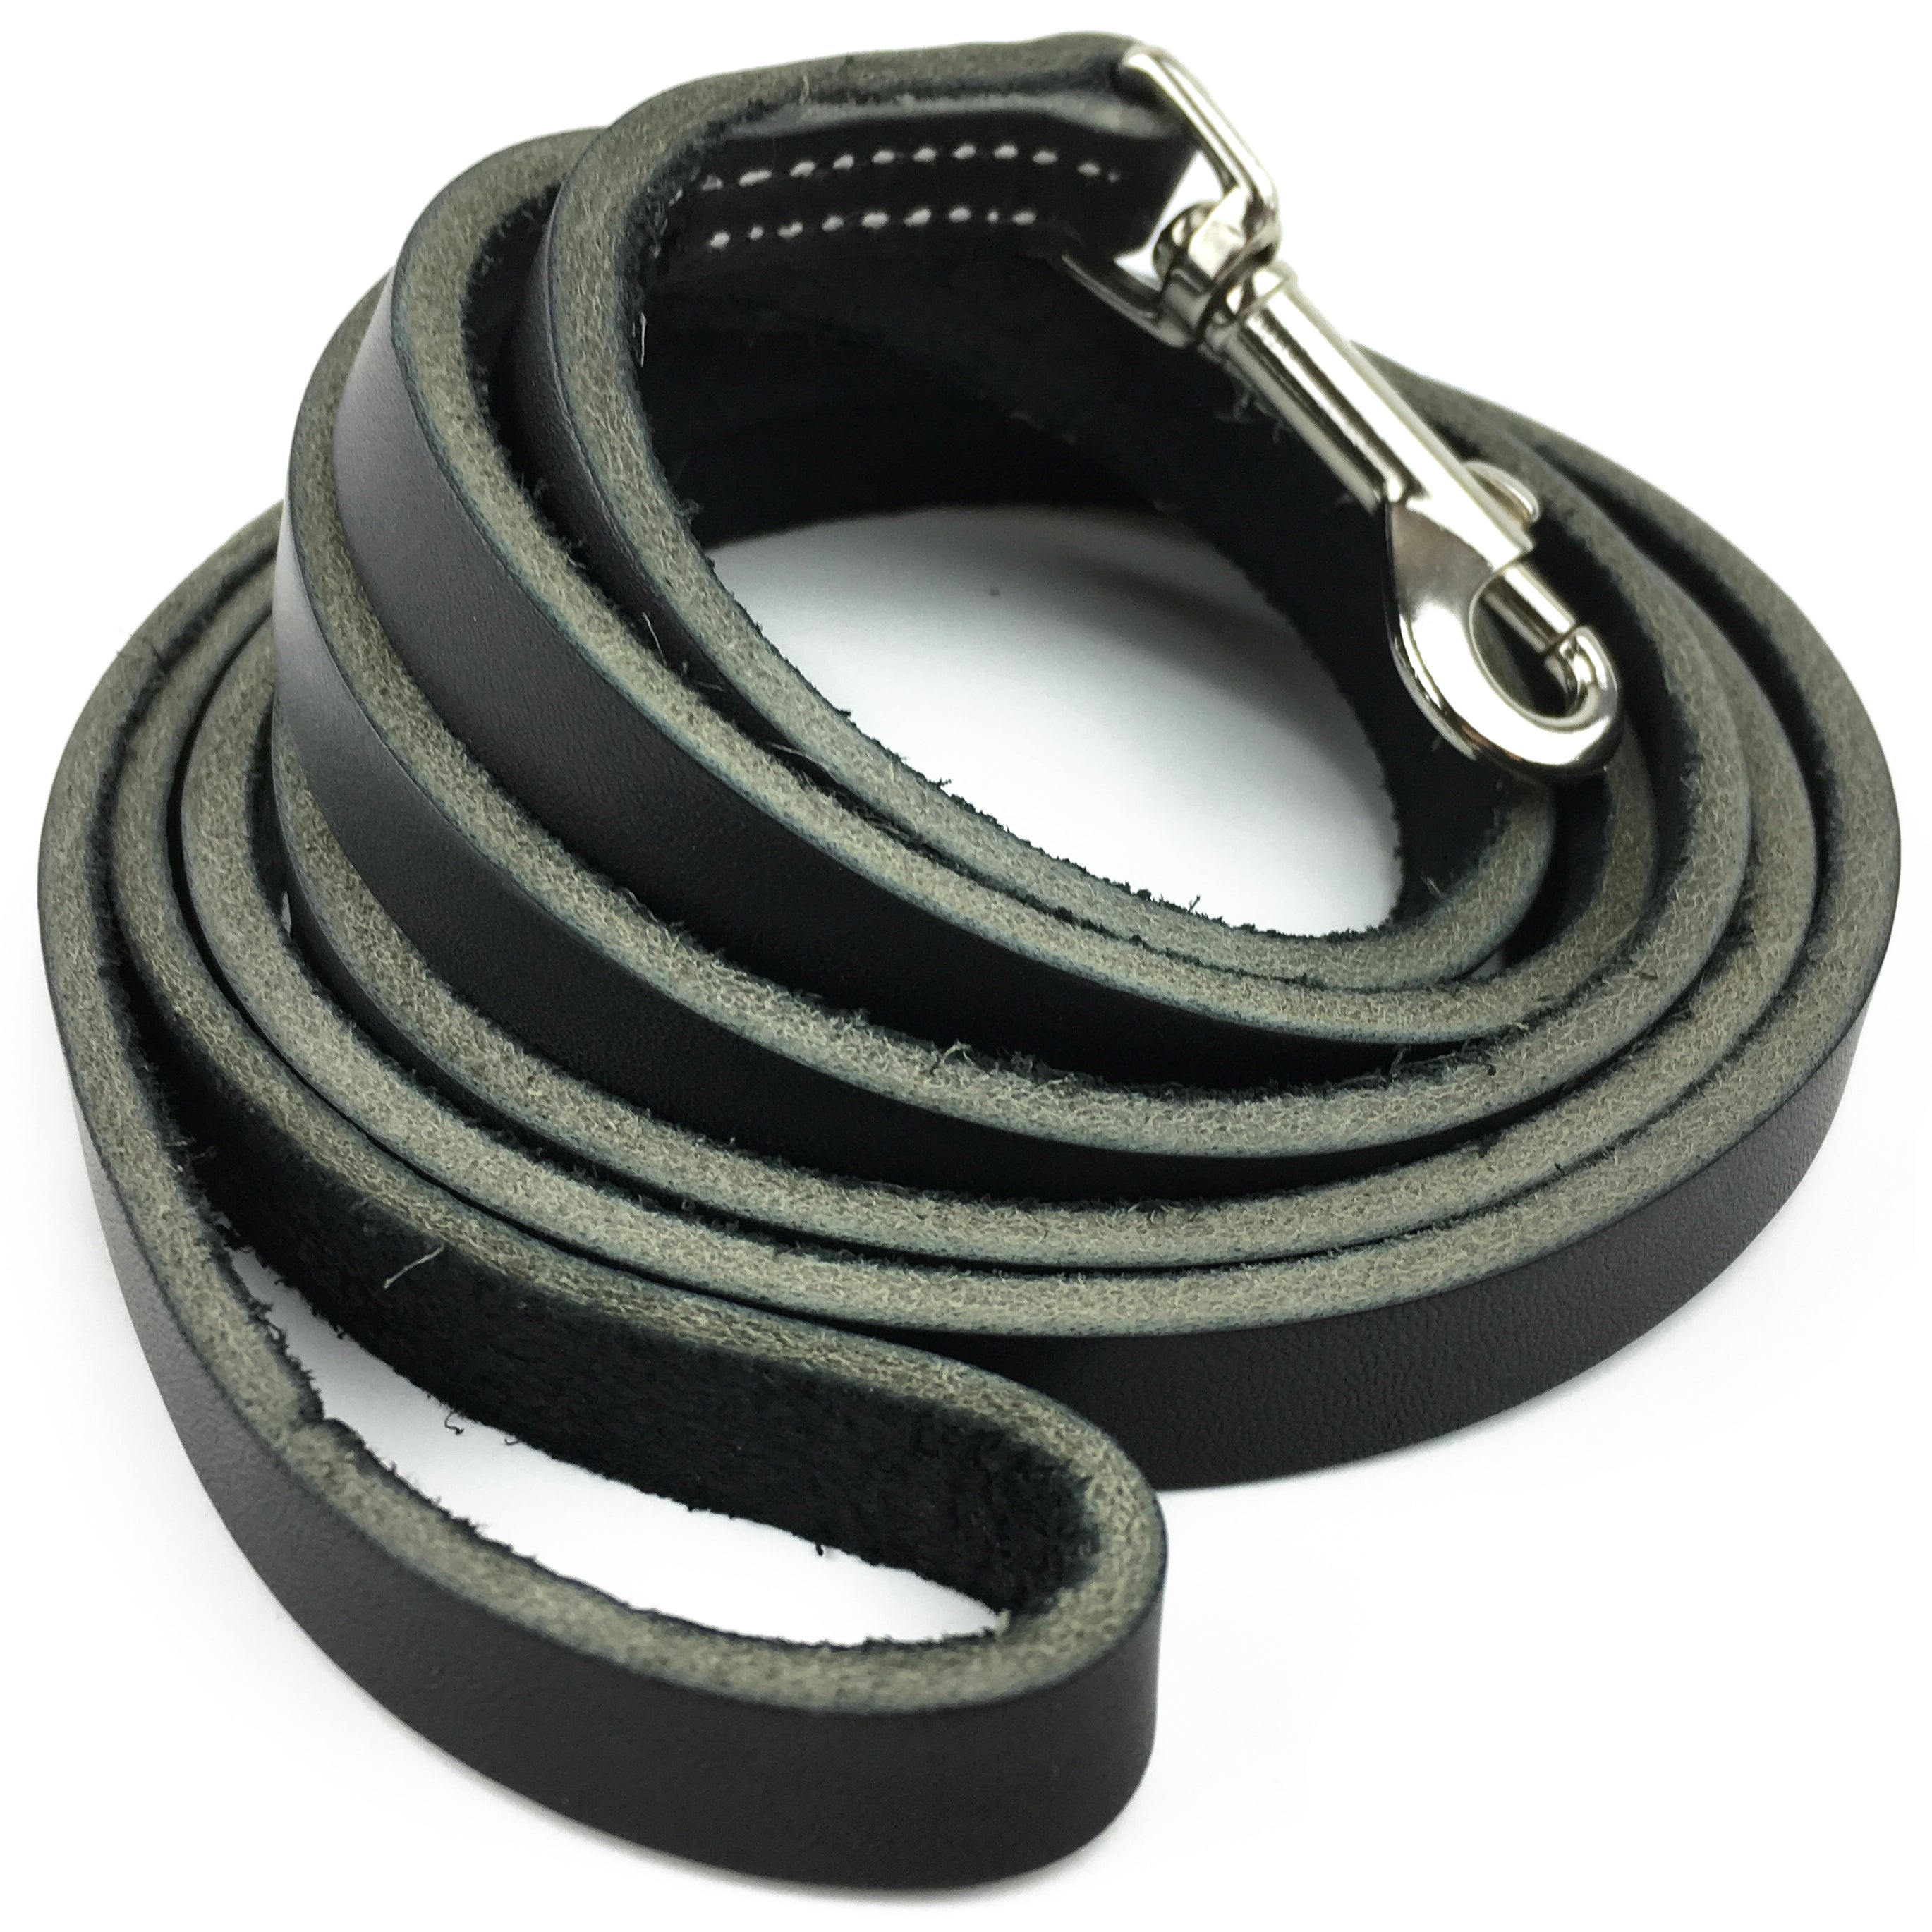 Leather leash dog ❤️ Premium quality for your darling